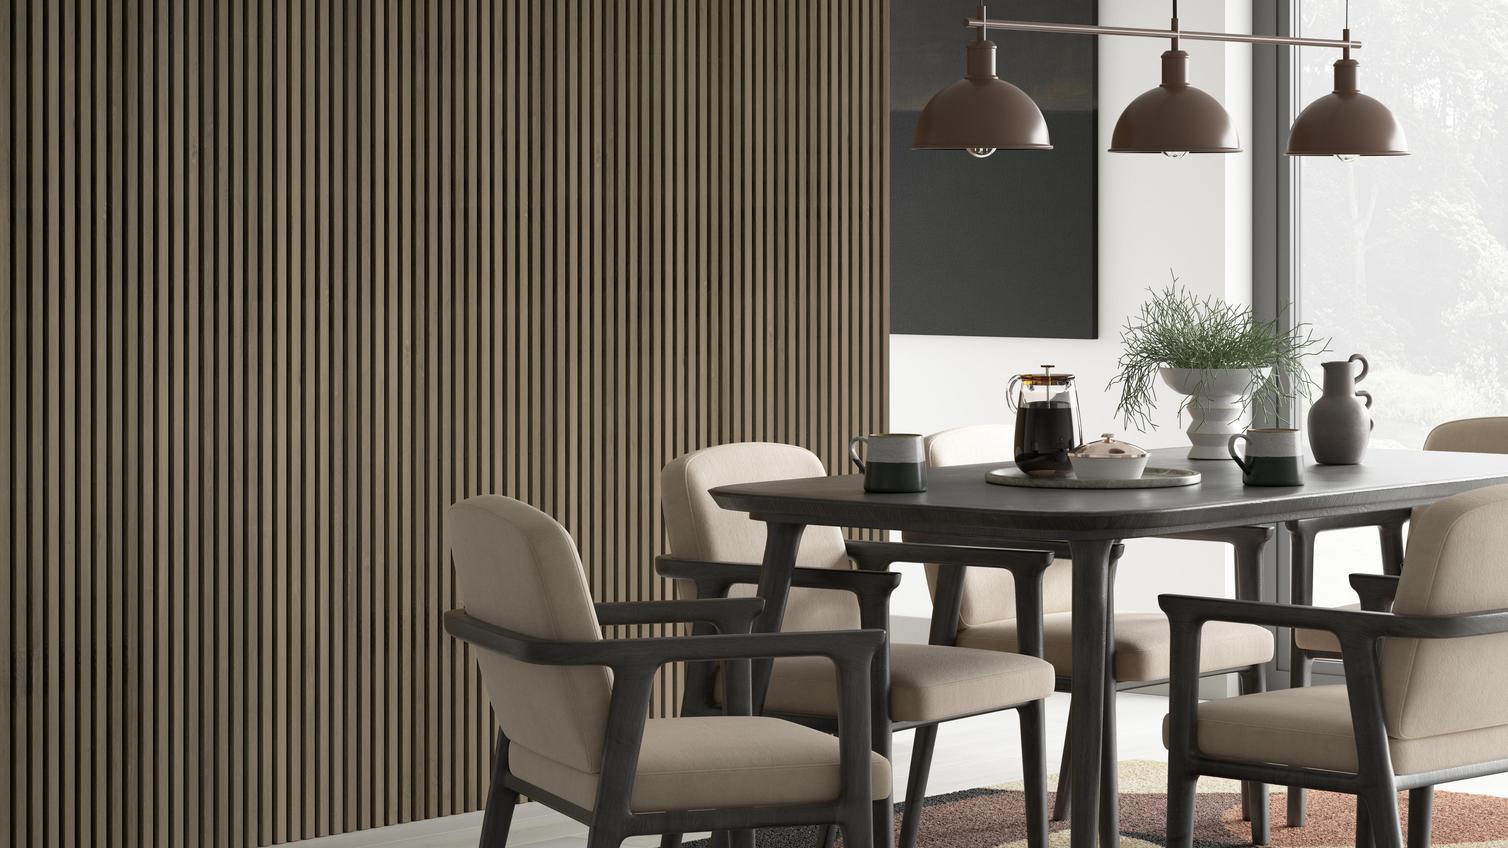 Acoustic wall cladding in a modern, minimalist dining room